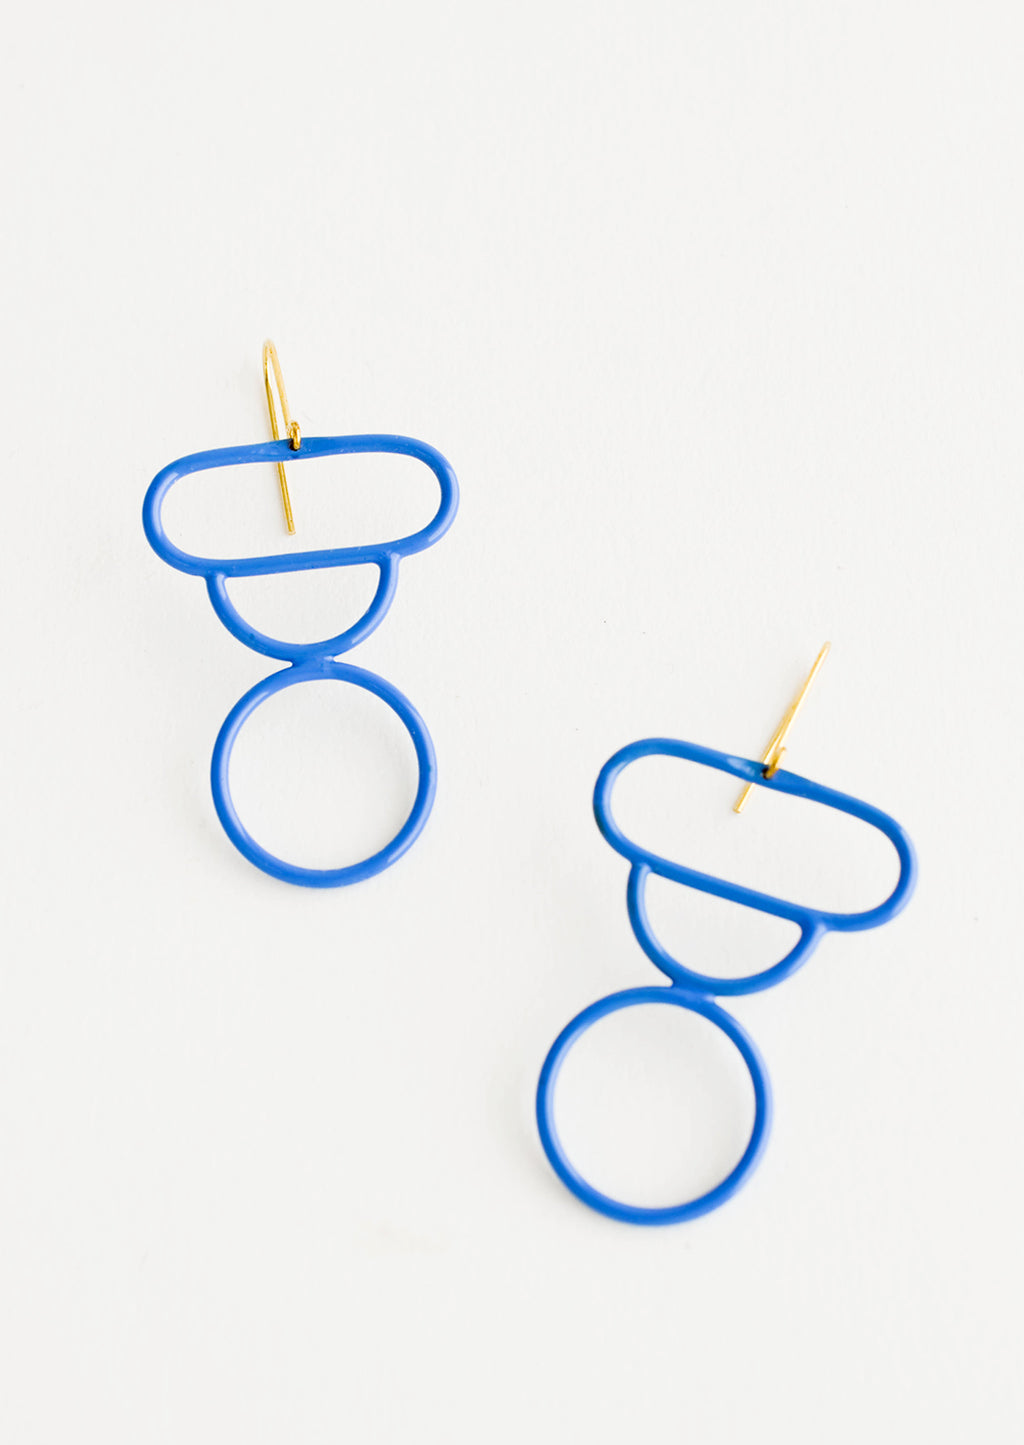 Cobalt: Bright blue enamel earrings in the shape of a circle, half circle, and oval stacked atop each other.